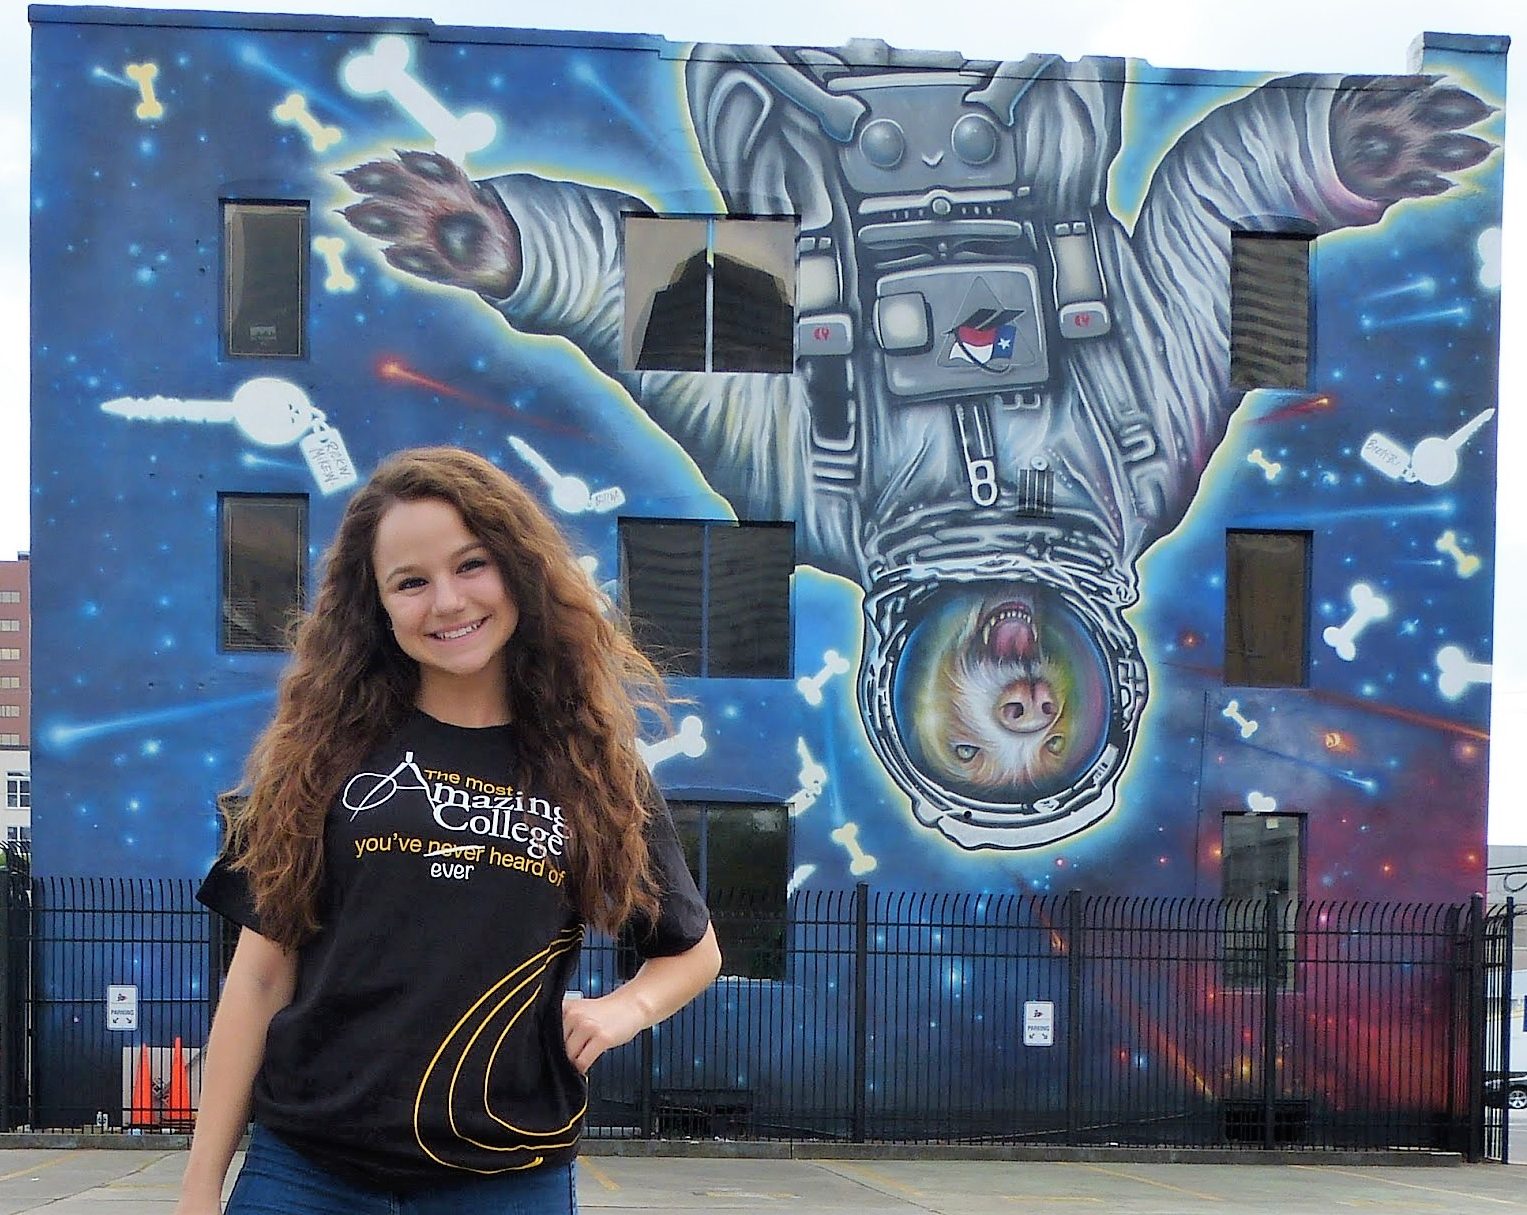 A photo of me wearing a Harvey Mudd Shirt in front of a graffiti decorated wall.